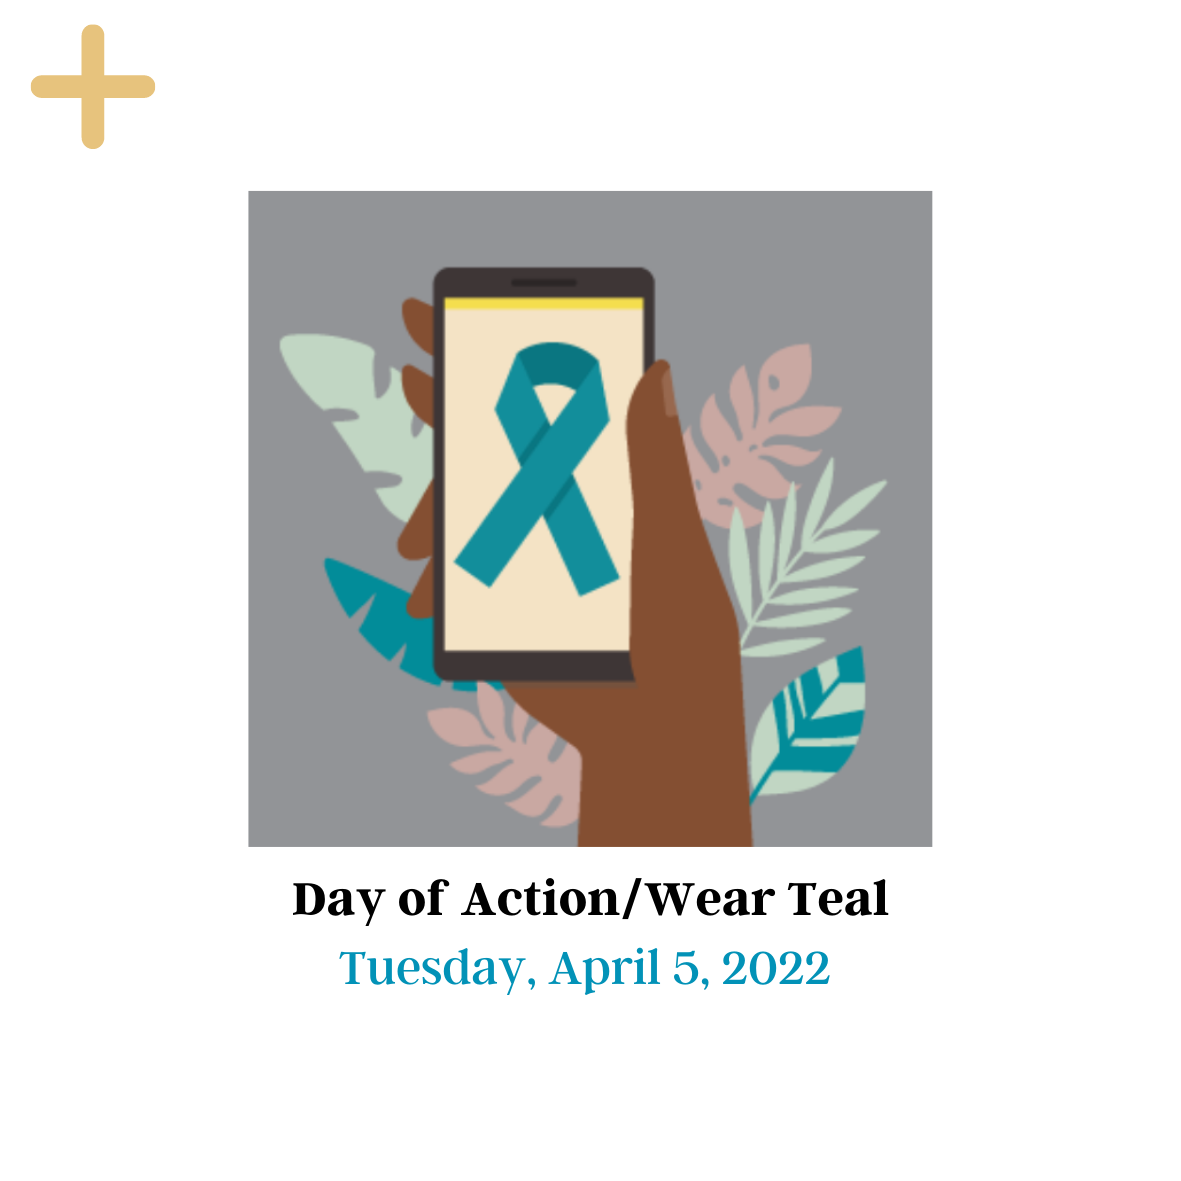 Day of action/wear teal cover page with a hand holding a phone. The phone screen shows a blue teal ribbon. Teal, light green, and pink leaves surround the hand. The picture has date at the bottom: Tuesday, April 5, 2022